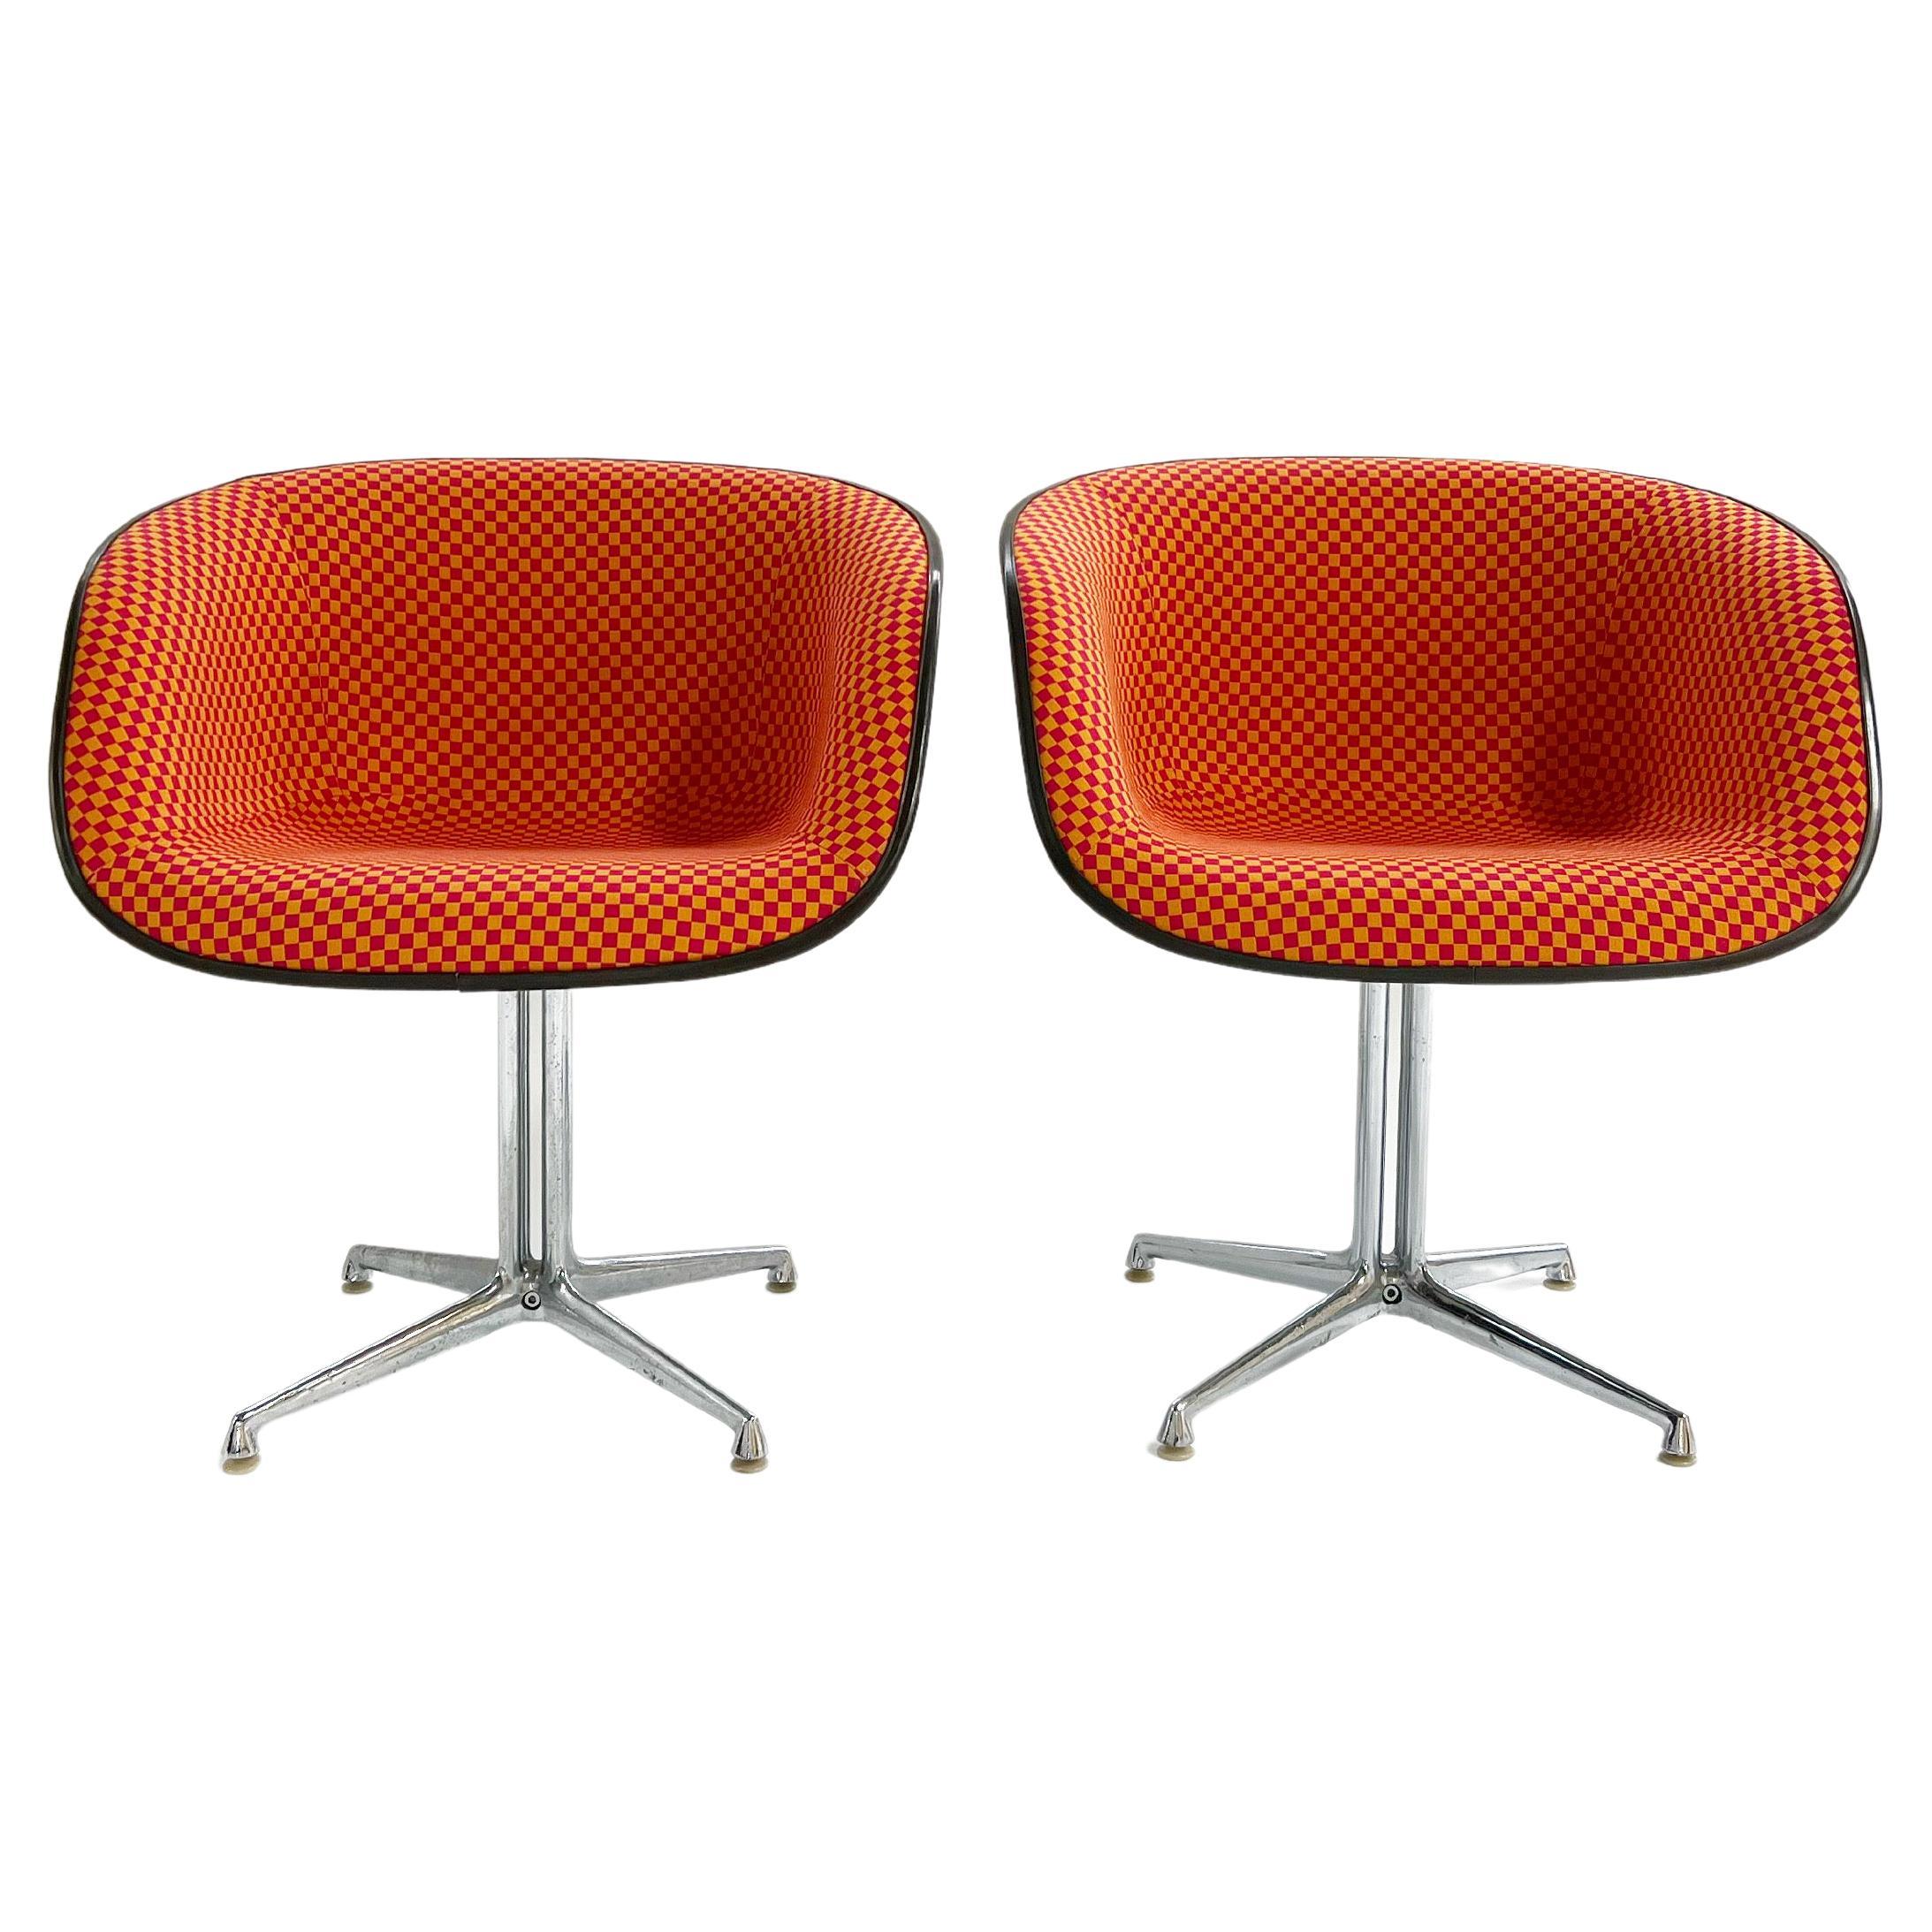 Charles and Ray Eames for Herman Miller La Fonda Chairs, Pair